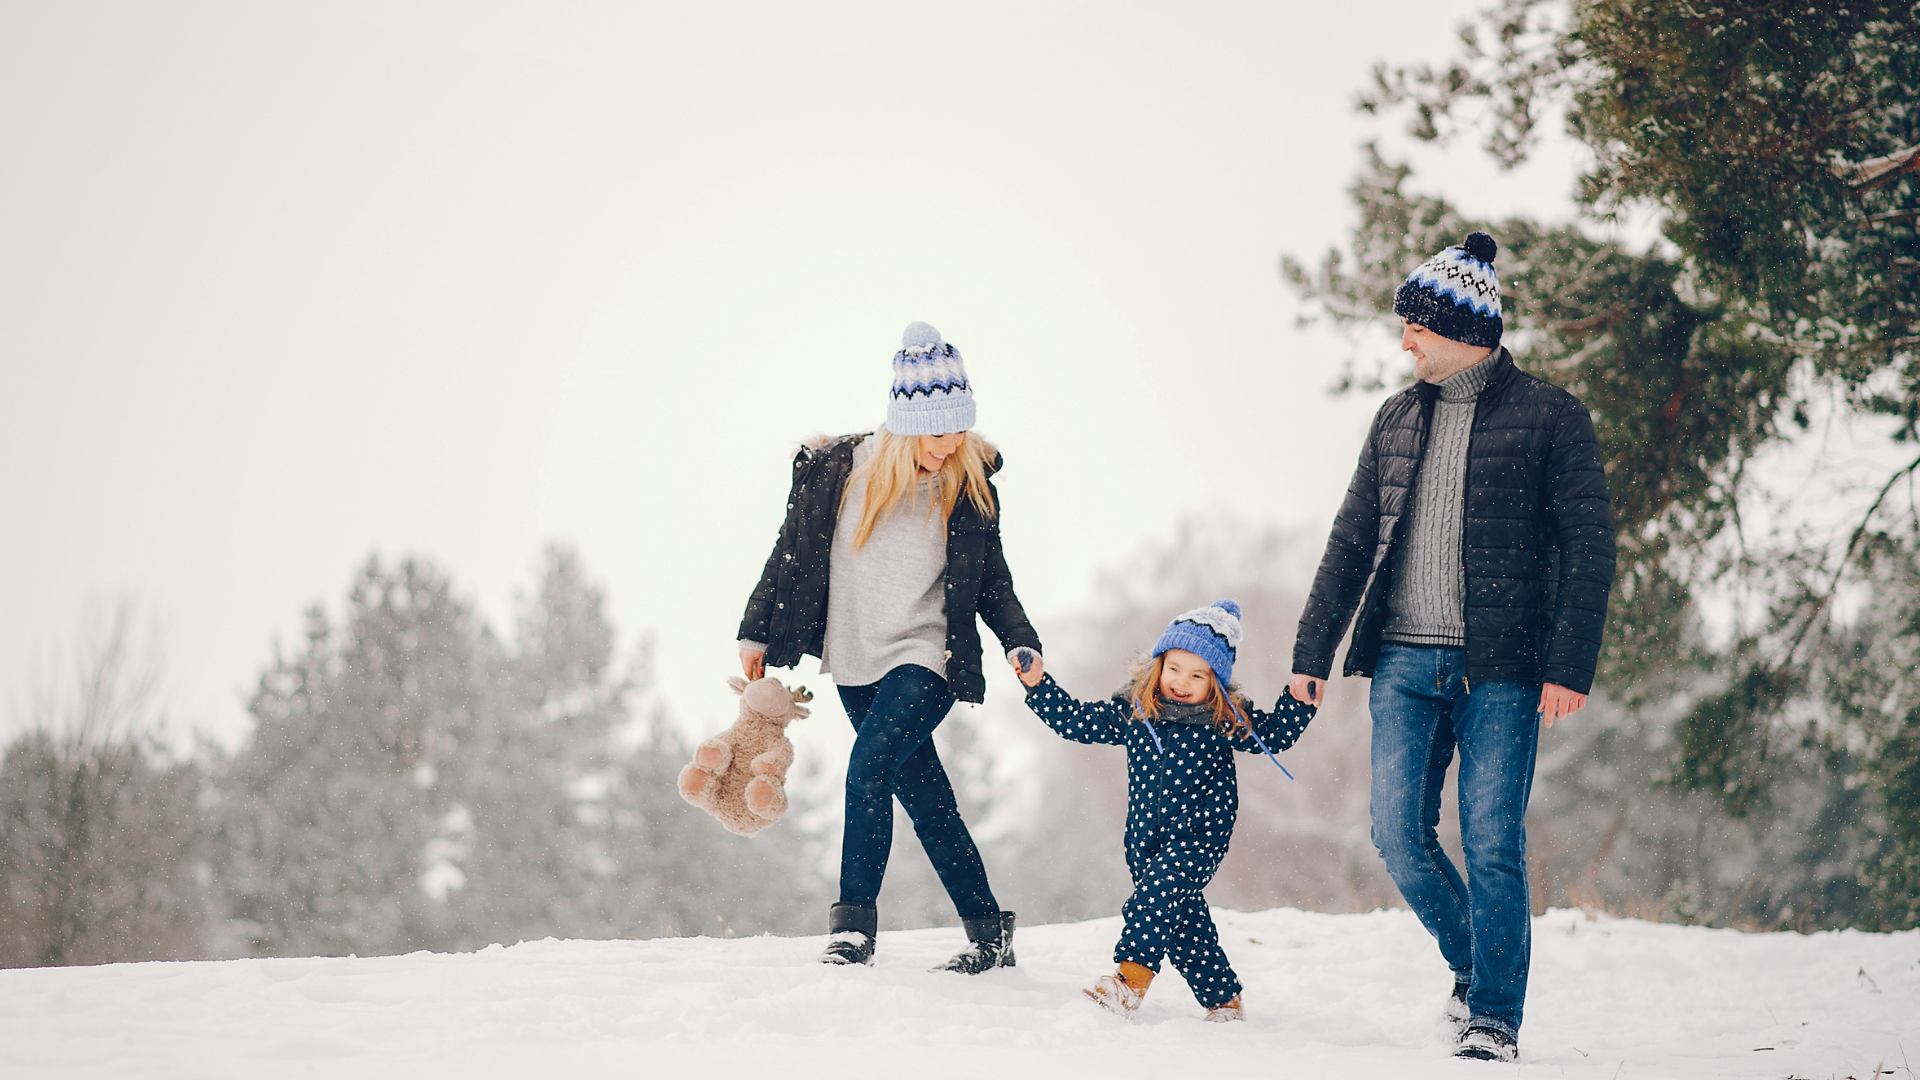 A couple walks with their young child in the snow.